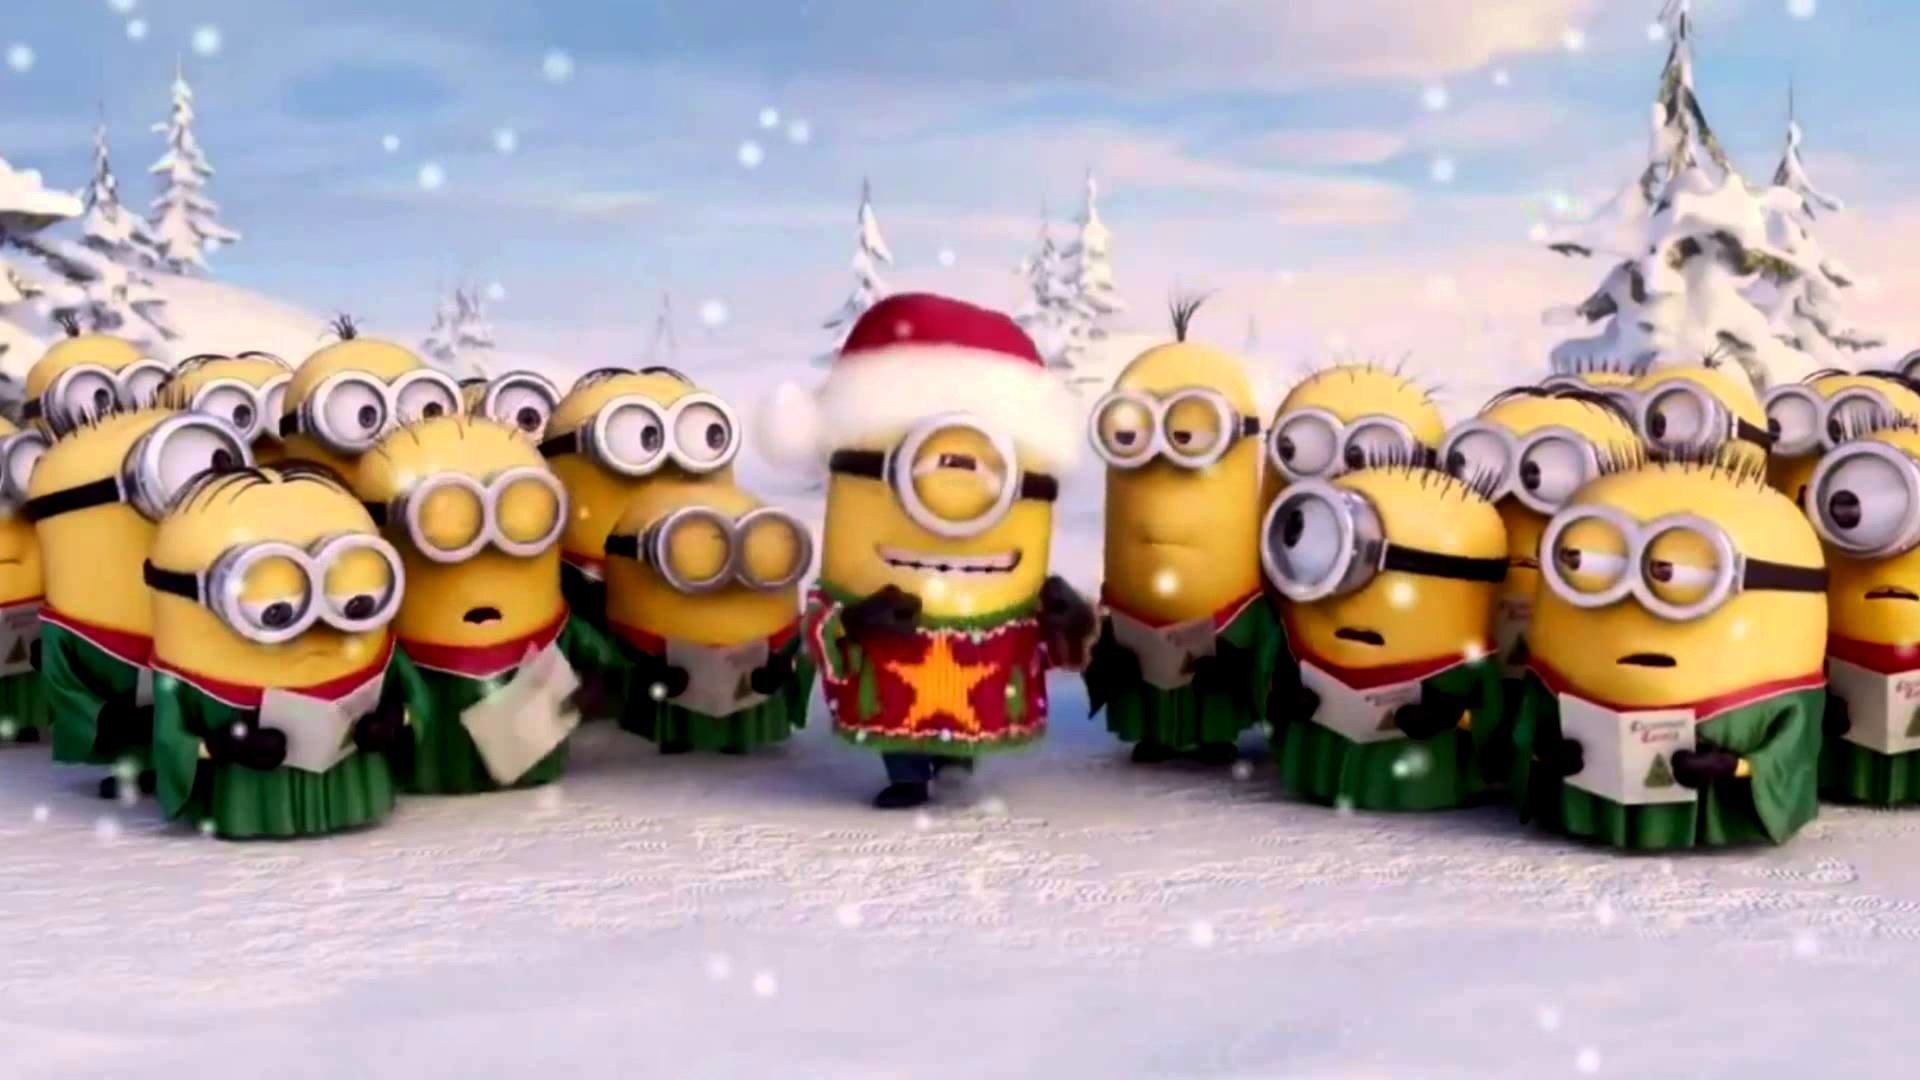 1920x1080 cute Christmas wallpapers minions Â· Christmas with minions in Suriname -  YouTube